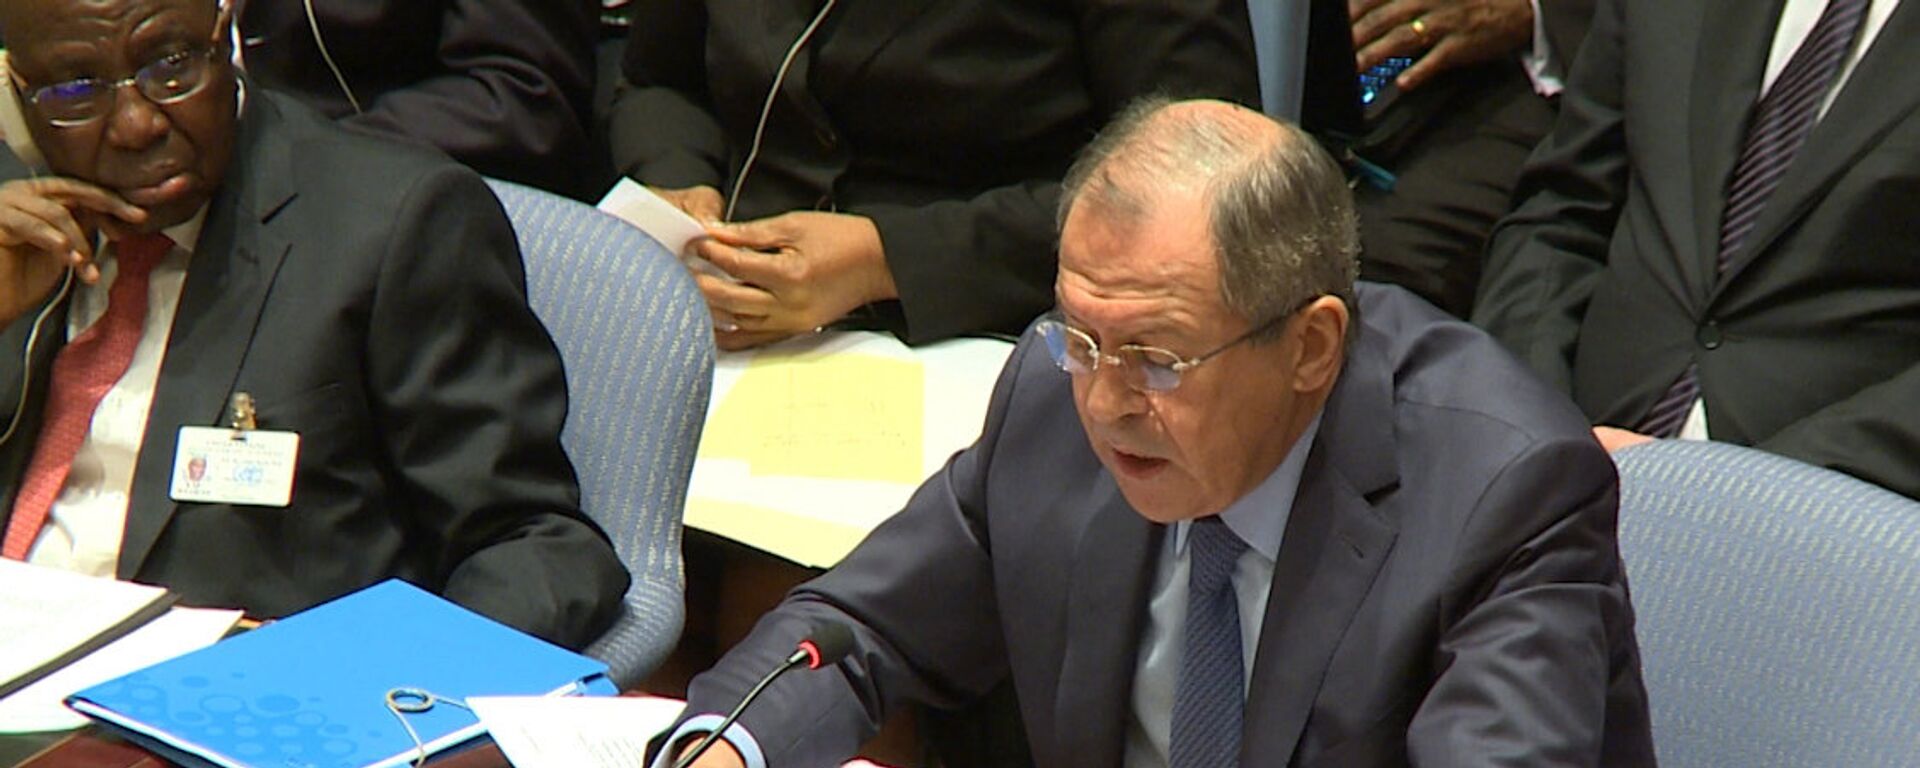 Russian Foreign Minister Sergey Lavrov takes part in UNSC ministerial debates - Sputnik International, 1920, 24.04.2023